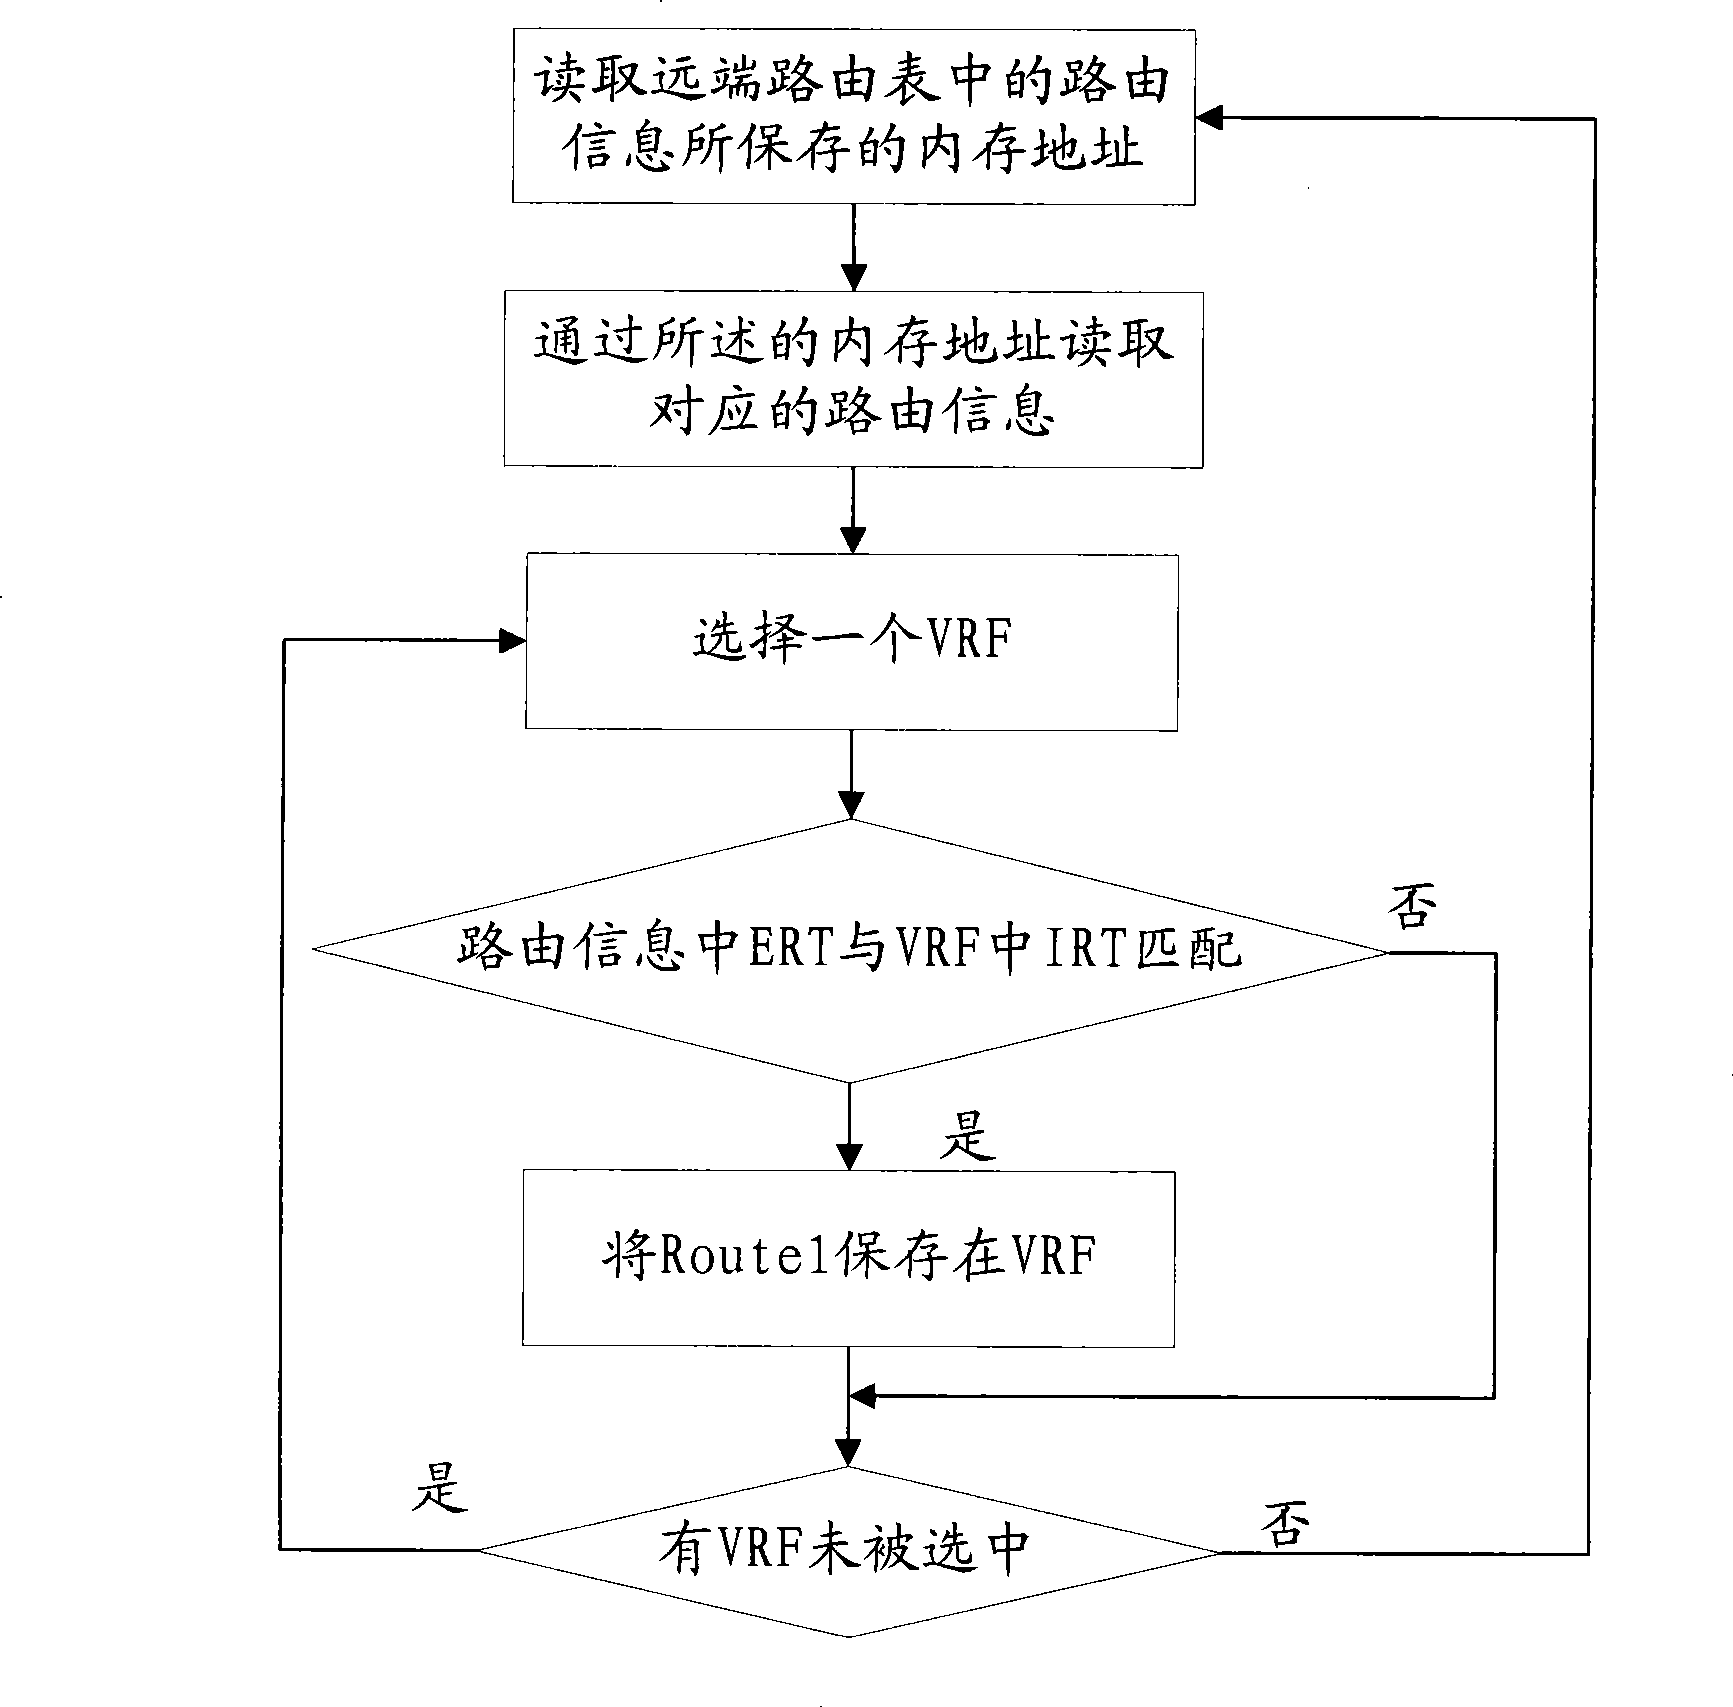 Method and apparatus for maintaining routing table